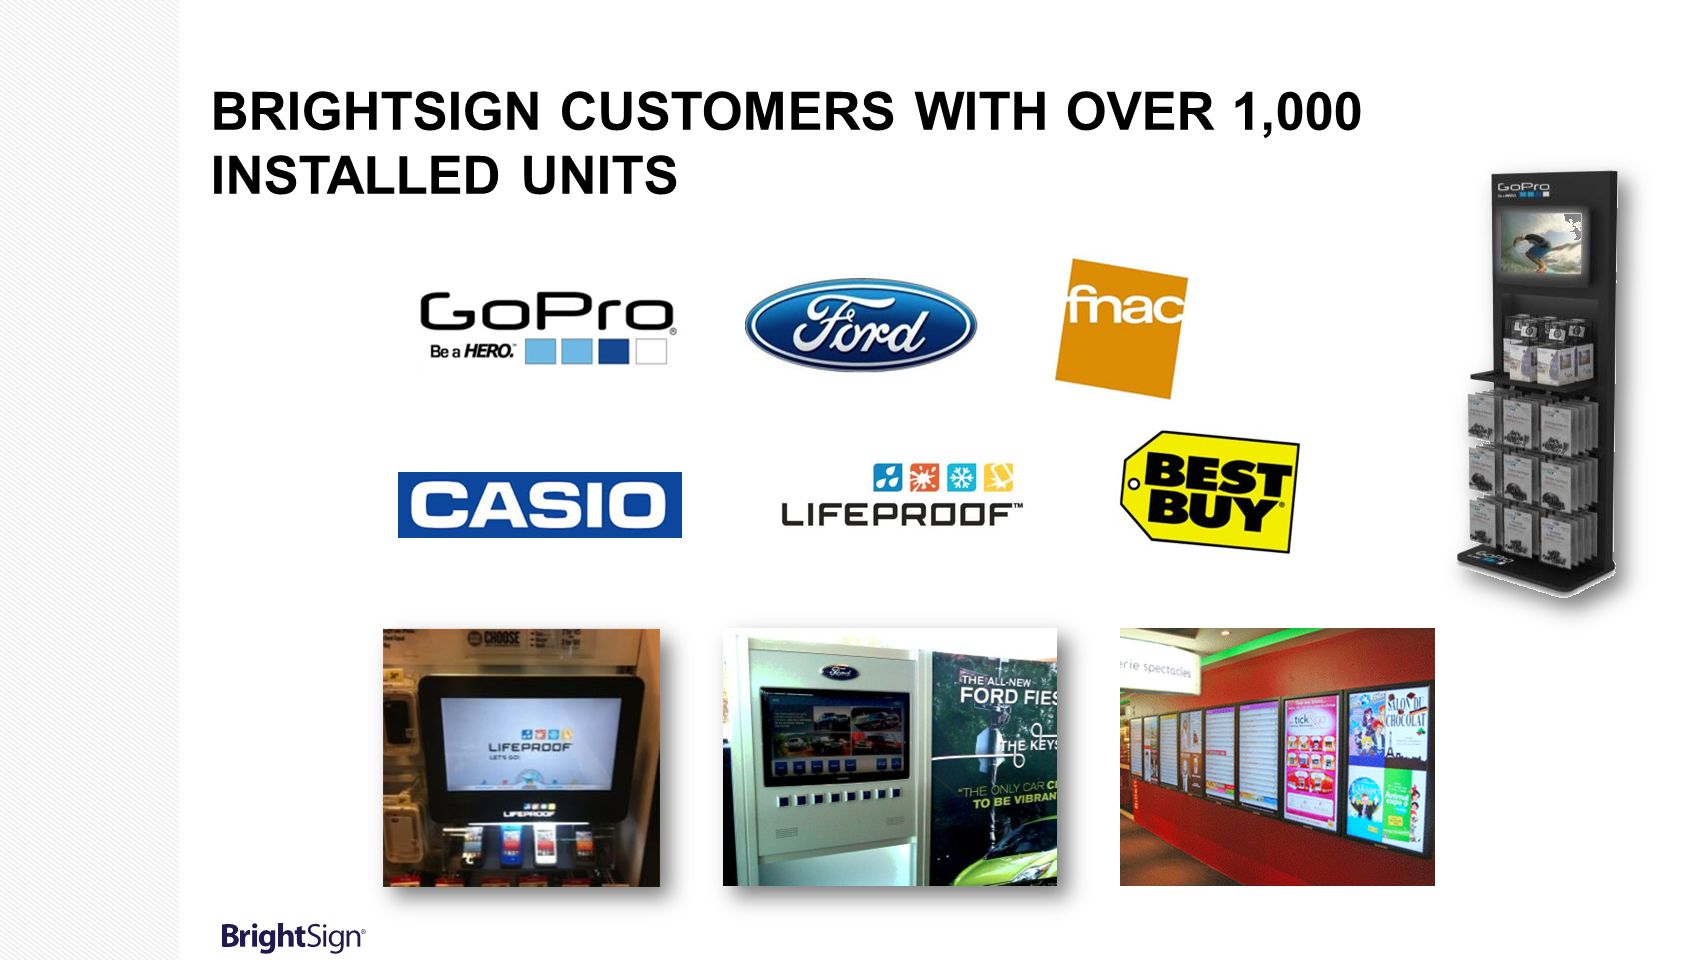 BrightSign customers with over 1,000 installed units